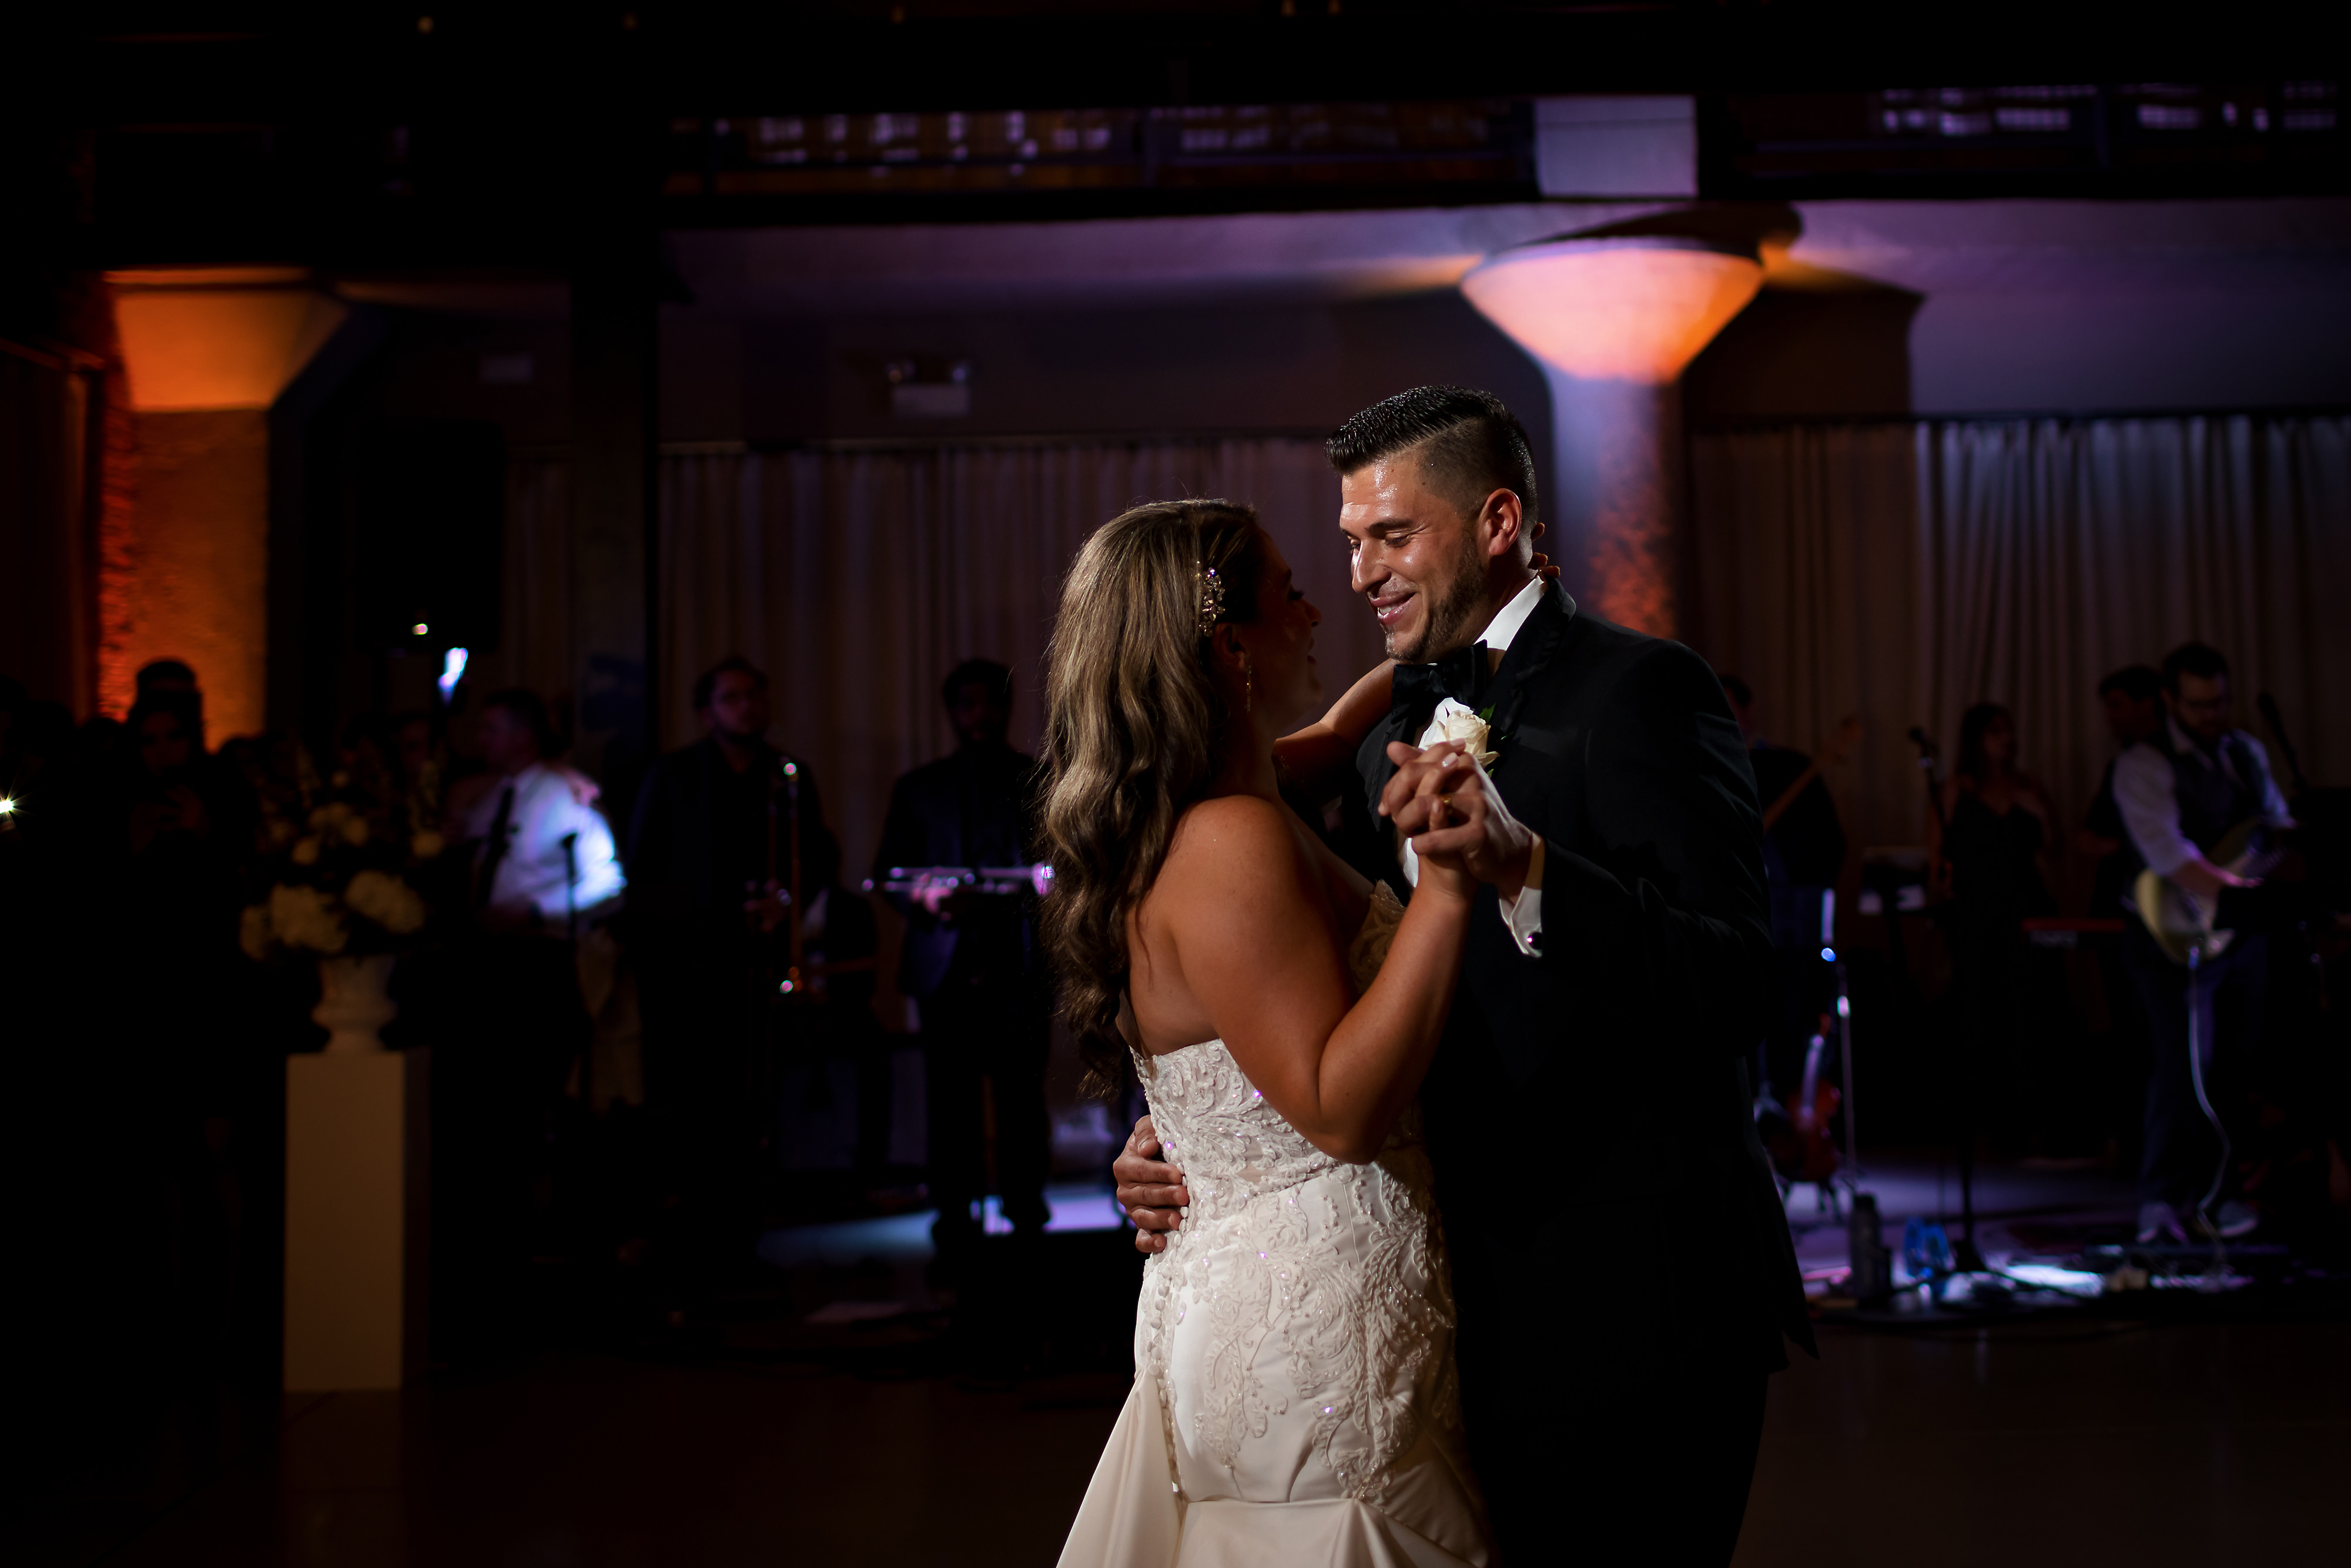 Bride and groom share first dance during wedding reception at Artifact Events in Chicago.